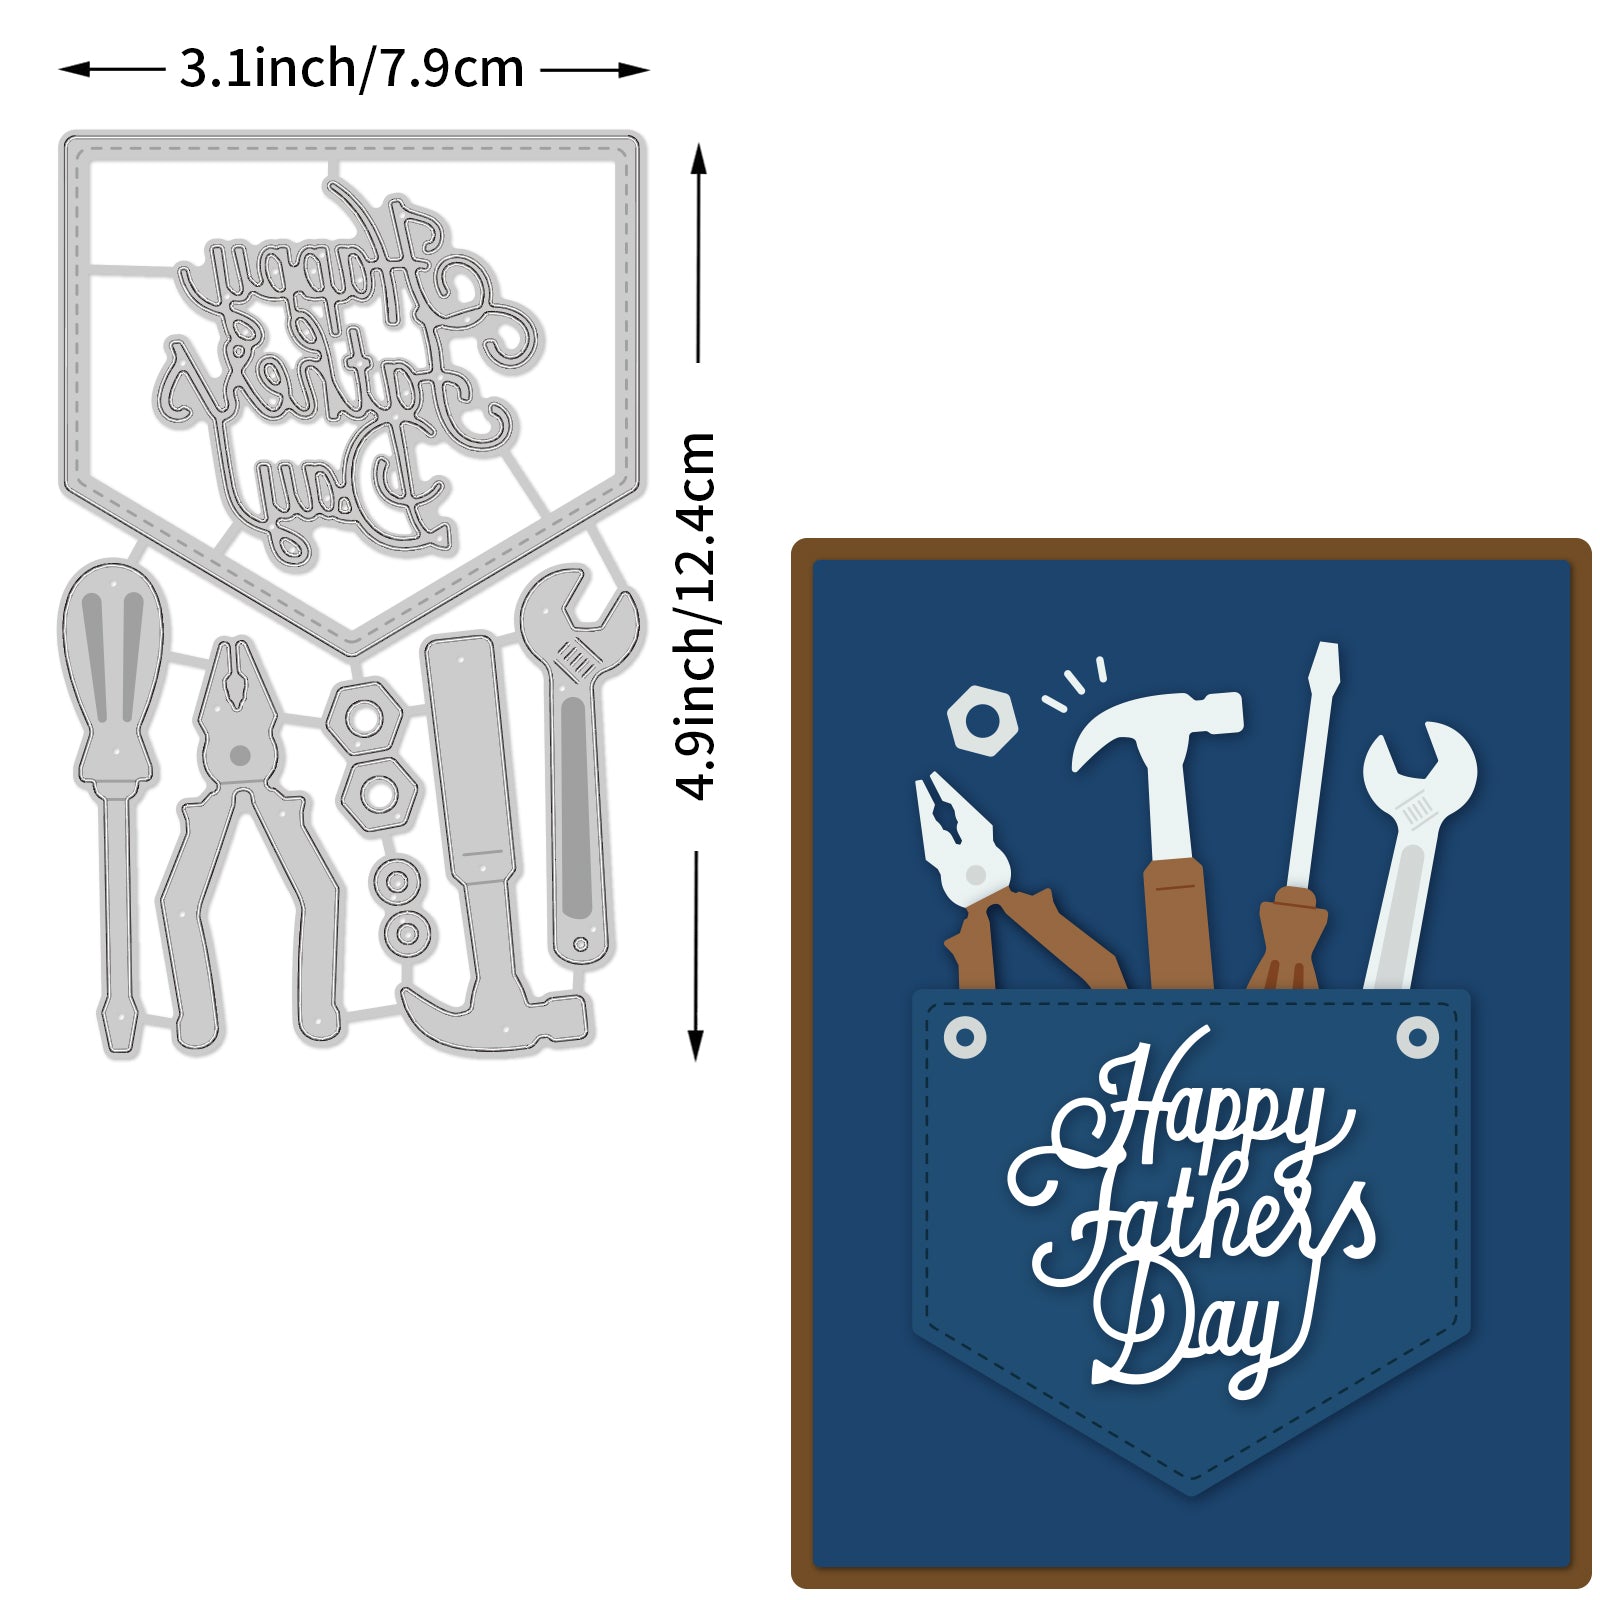 Globleland Father's Day, Happy Father's Day, Tools, Wrench, Hammer, Pliers Carbon Steel Cutting Dies Stencils, for DIY Scrapbooking/Photo Album, Decorative Embossing DIY Paper Card